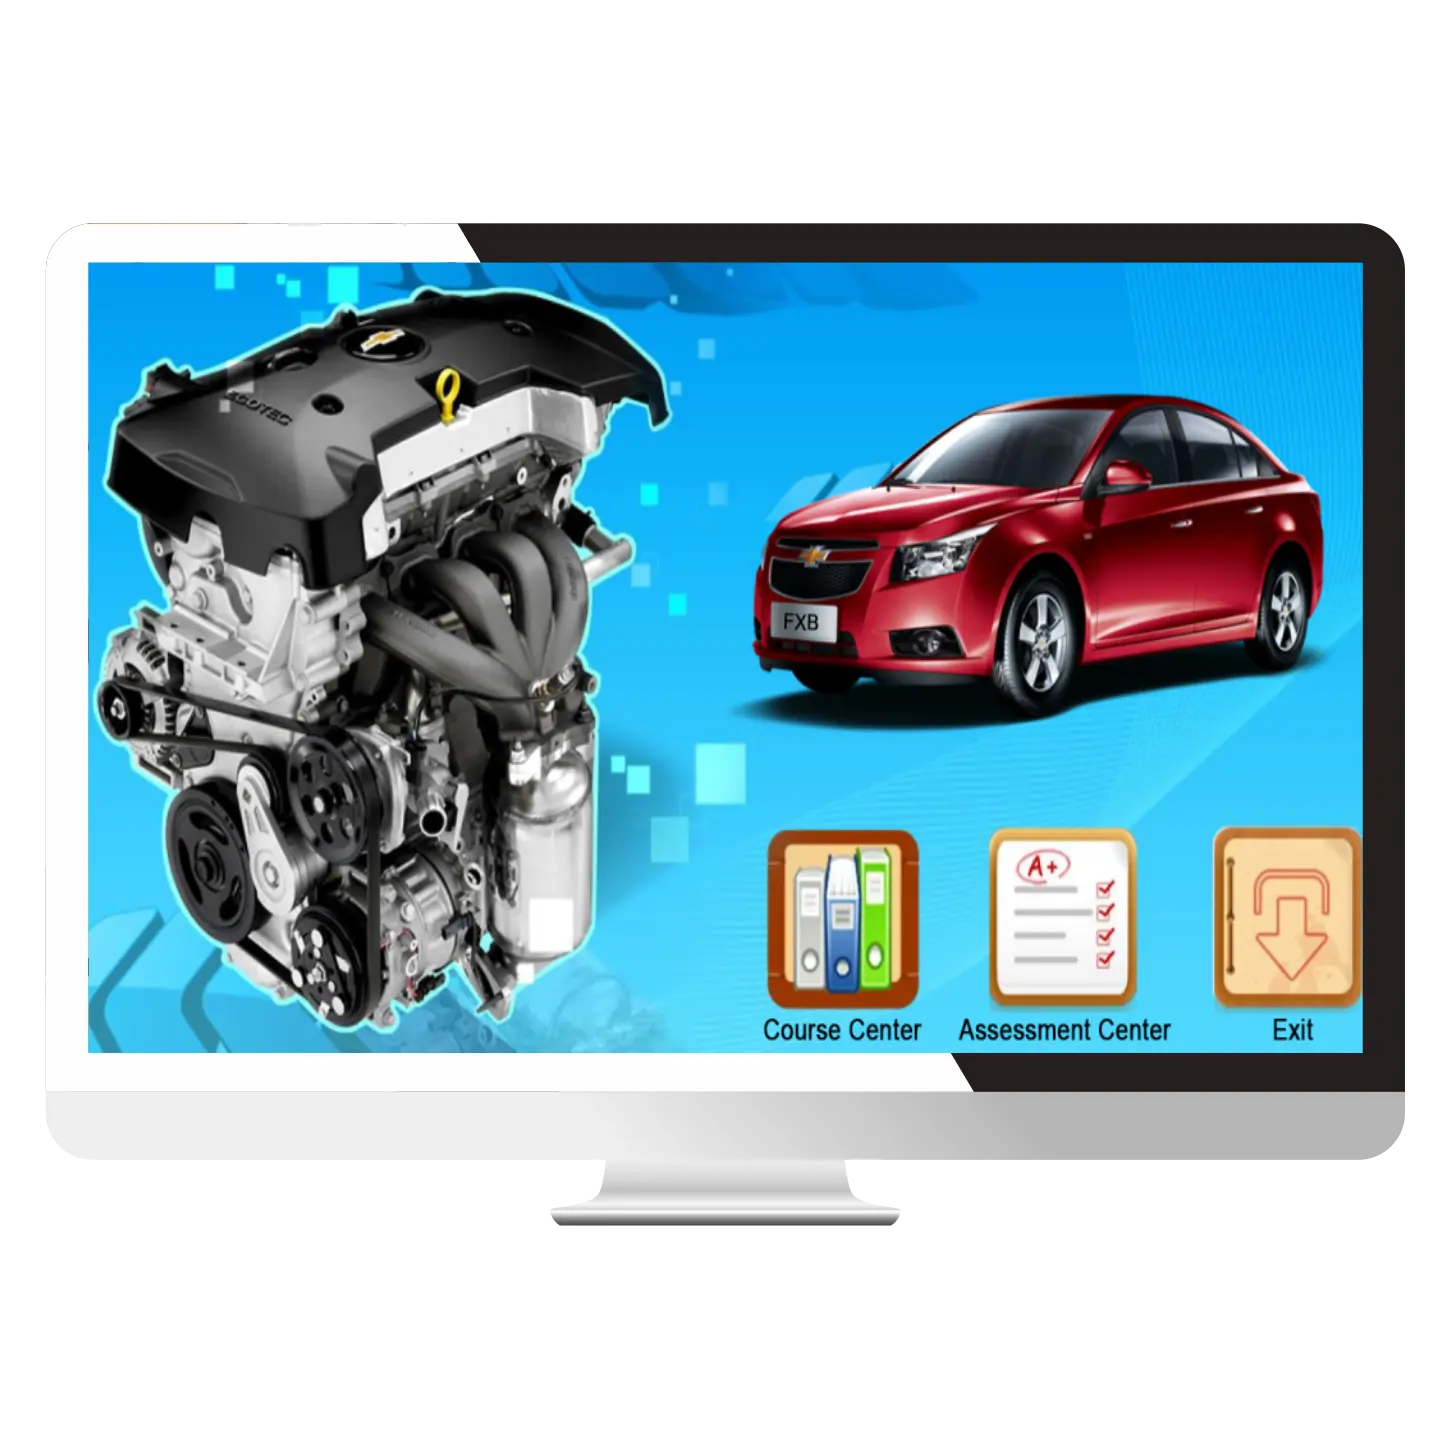 Engine Disassembly and Assembly Software System